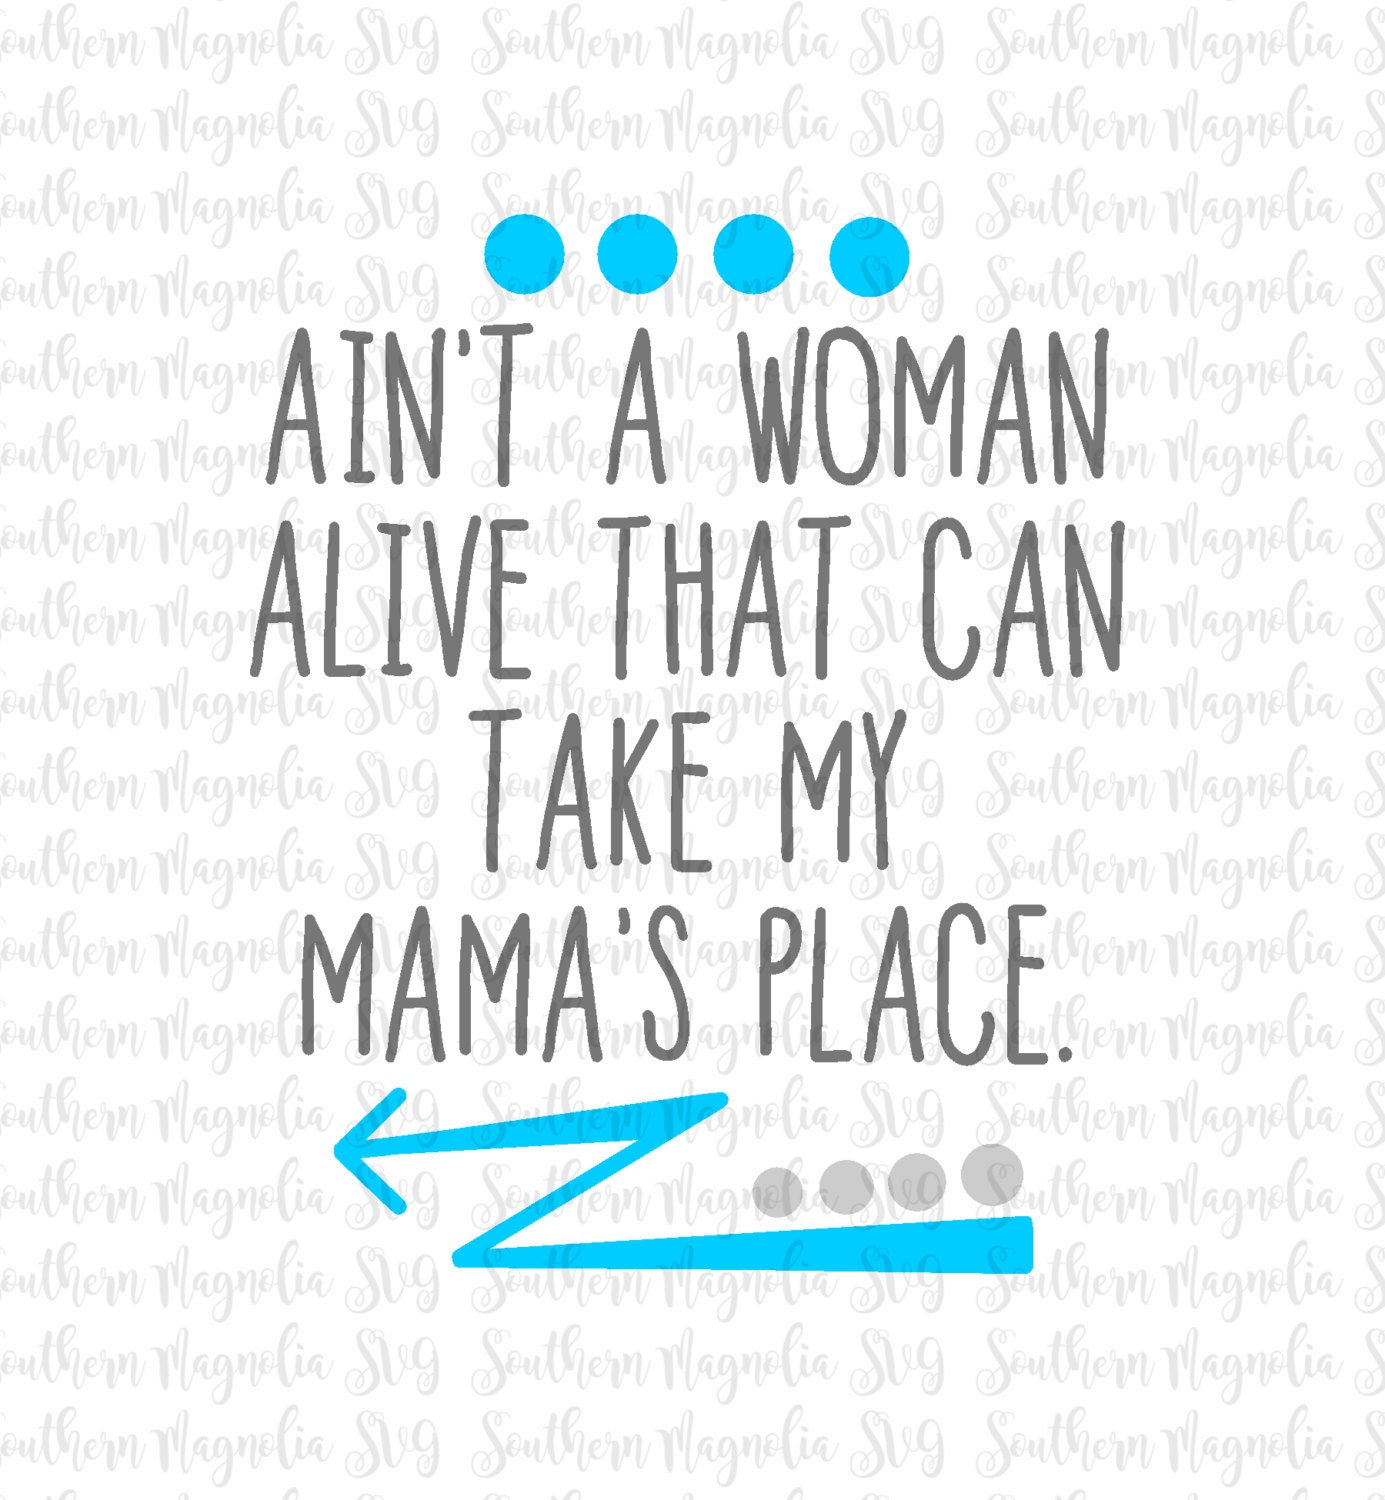 Download Aint a Woman Alive the Can Take My Mamas Place Tupac